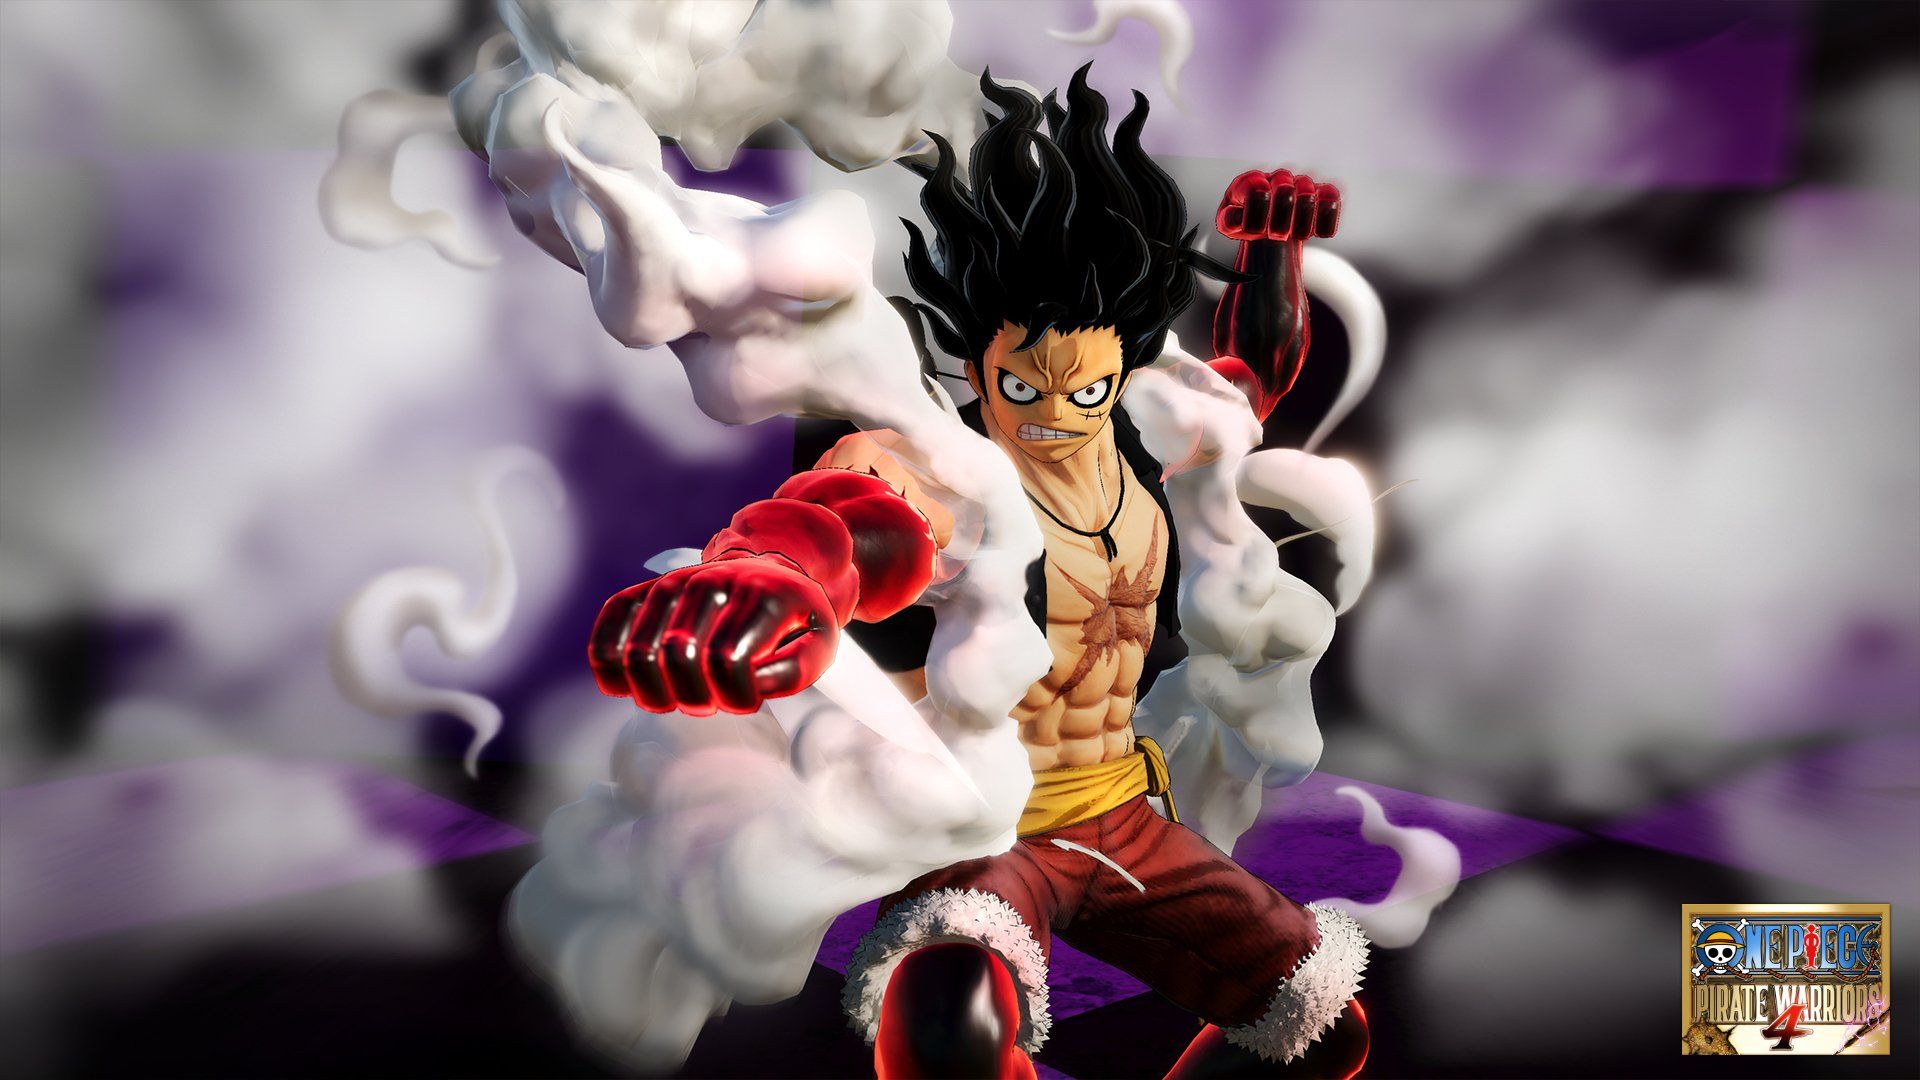 One Piece Pirate Warriors 4 To Launch In March 2020 In The West